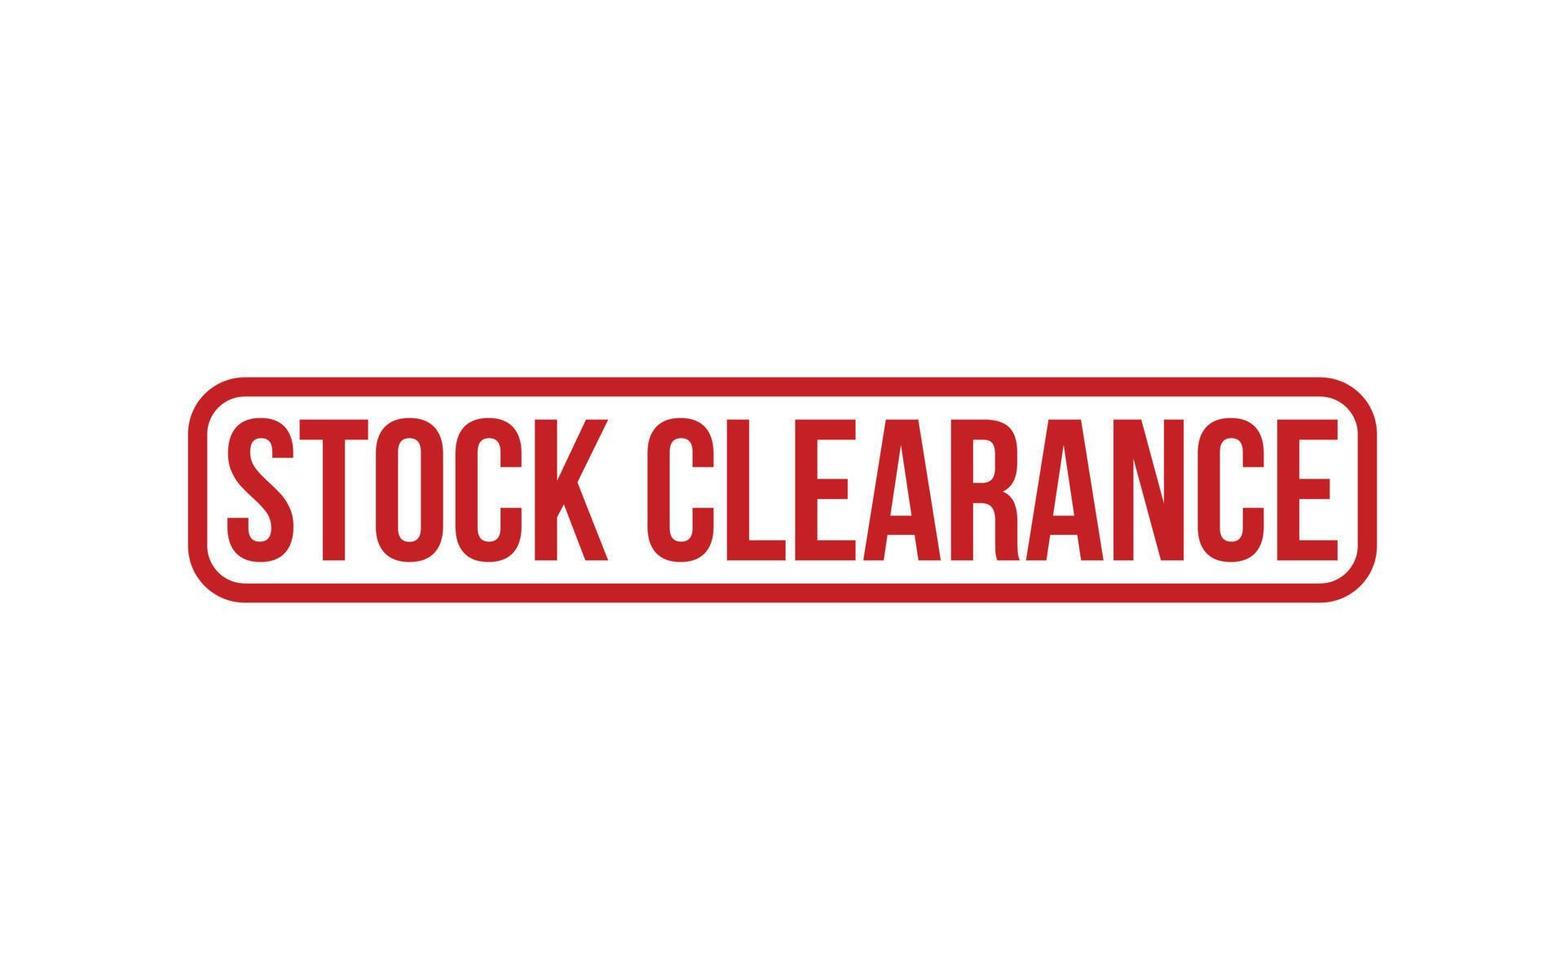 Stock Clearance Rubber Stamp Seal Vector